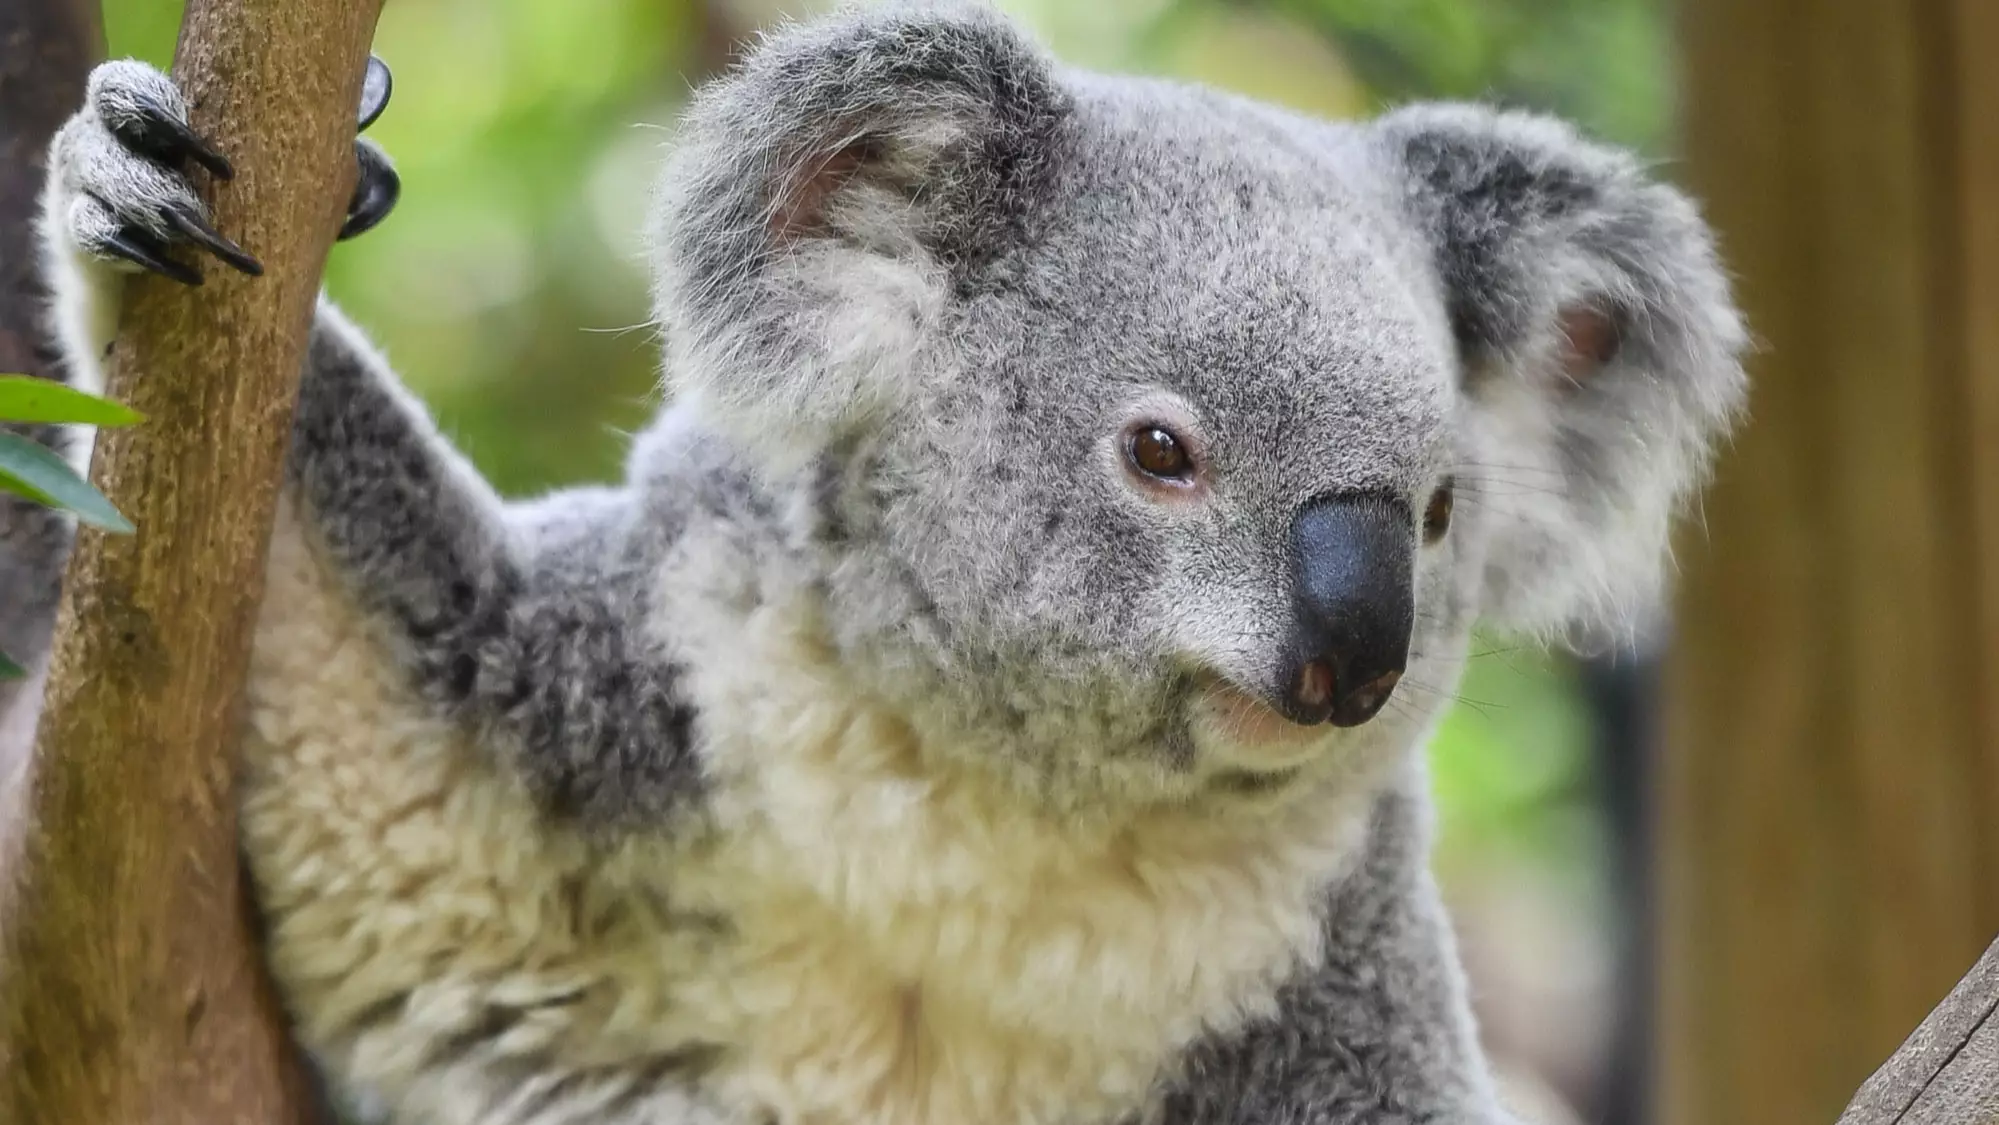 Koalas Will Be Driven To Extinction 'Well Before' 2050 In NSW, Inquiry Finds